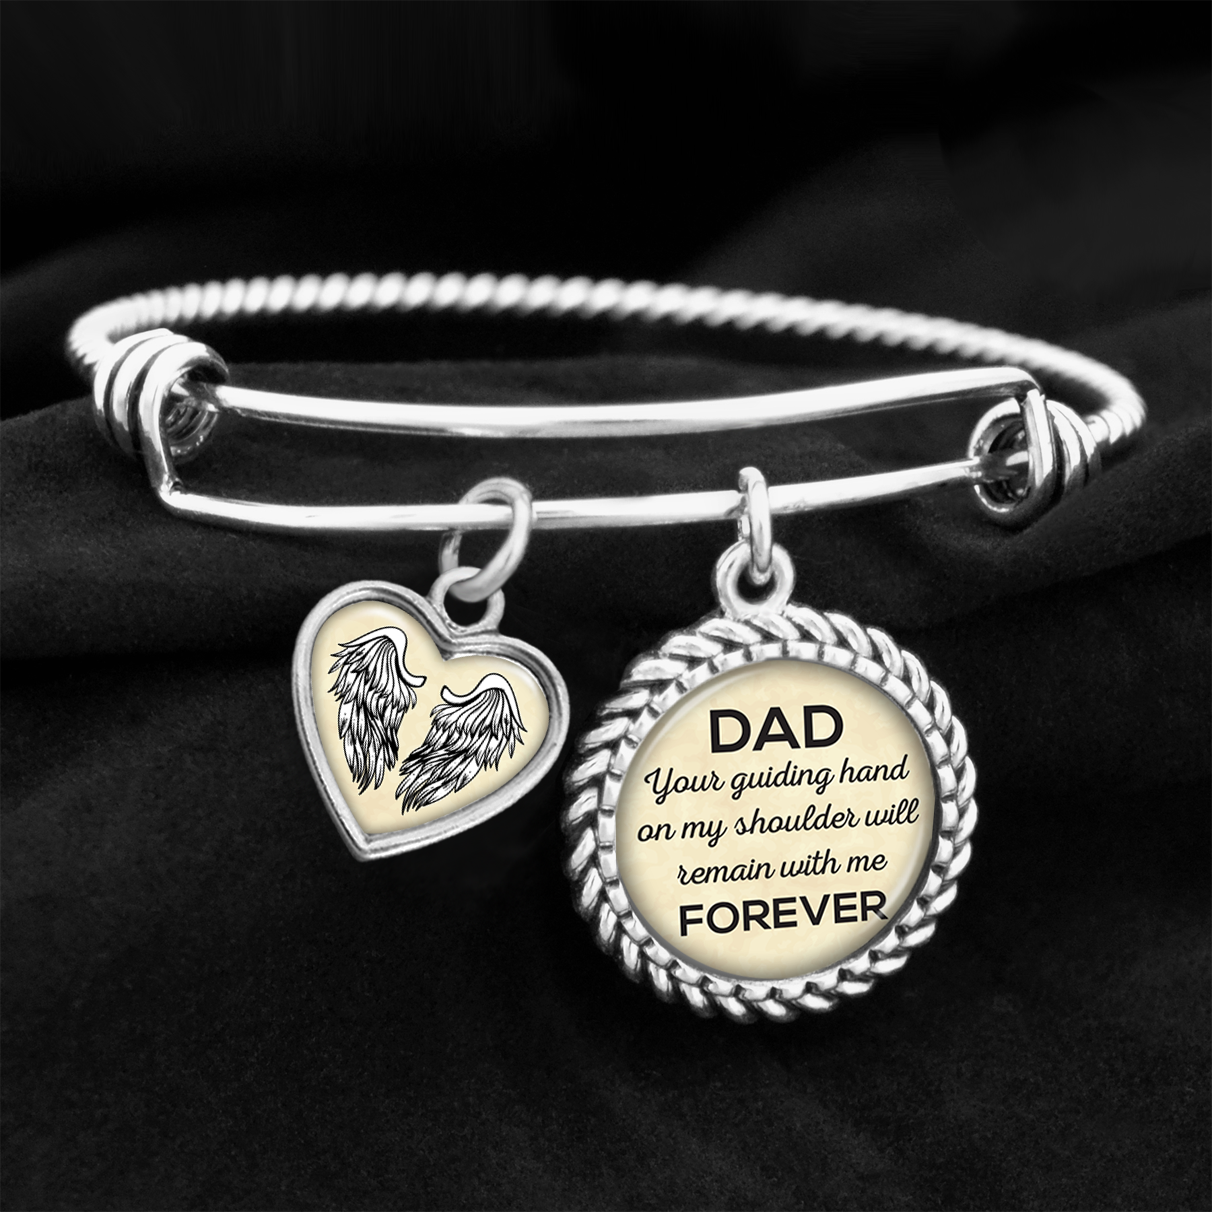 Dad Your Guiding Hand Charm Bracelet